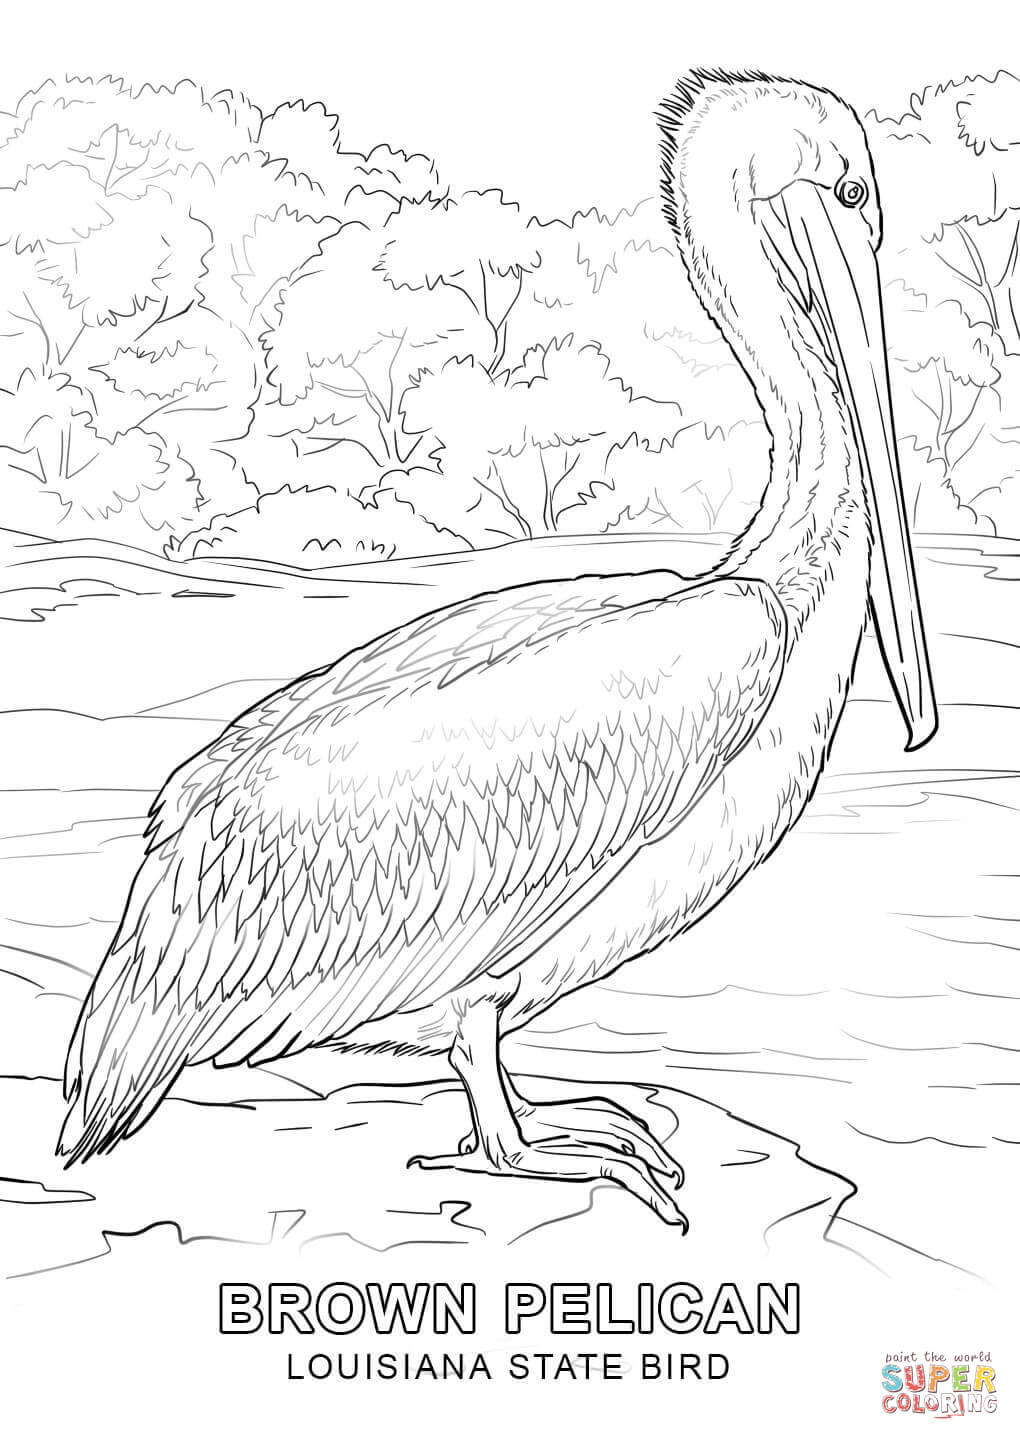 Louisiana State Bird coloring page | Free Printable Coloring Pages